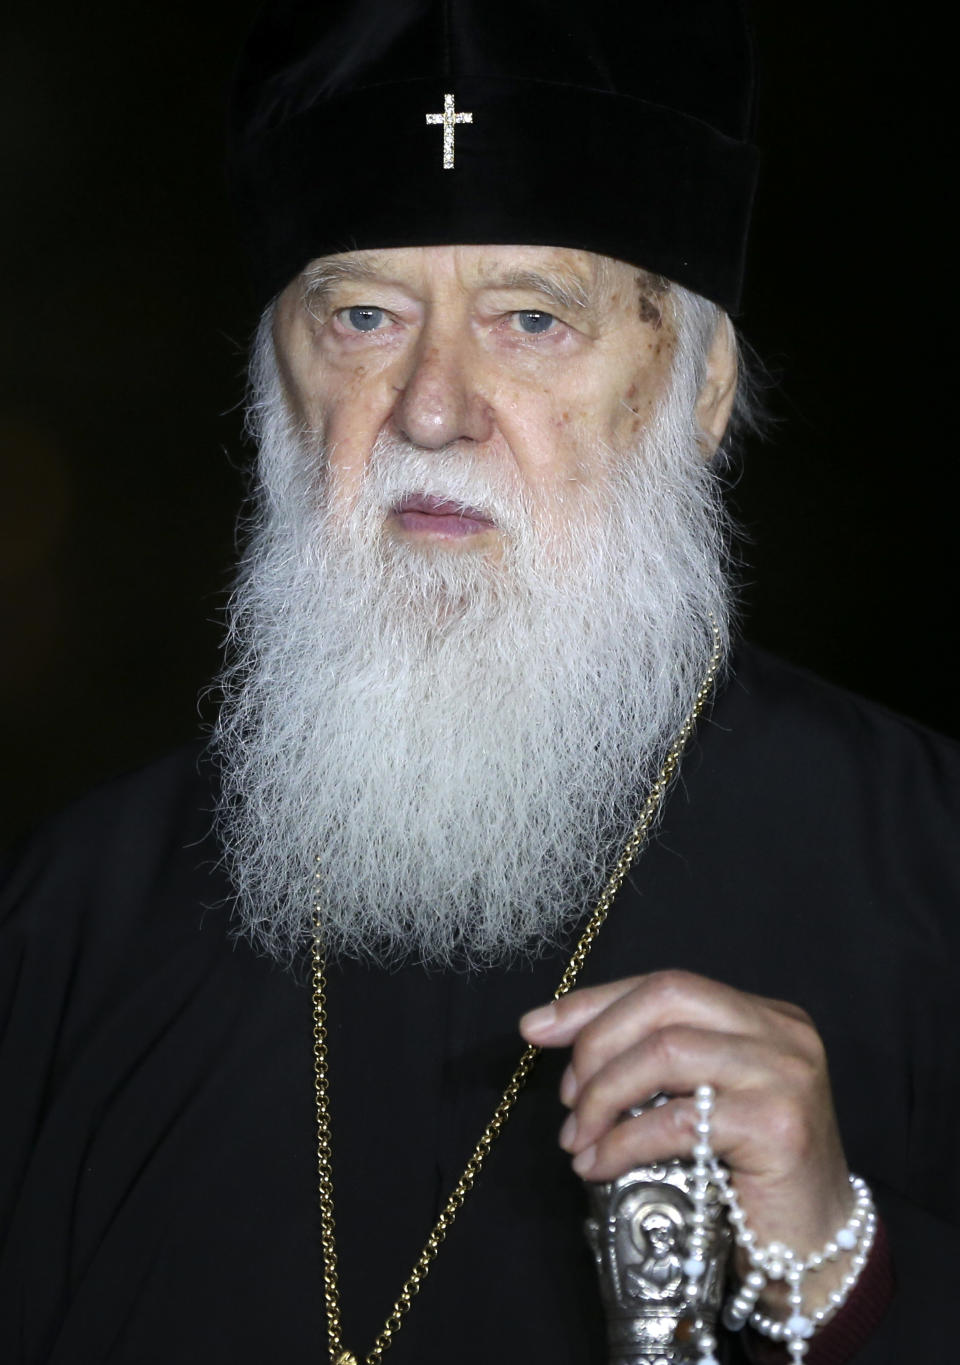 Patriarch Filaret, head of the Ukrainian Orthodox Church of the Kiev Patriarchate, speaks during a news briefing in Kiev, Ukraine, Thursday, Oct. 11, 2018. The Istanbul-based Ecumenical Patriarchate says it will move forward with its decision to grant Ukrainian clerics independence from the Russian Orthodox Church. (AP Photo/Efrem Lukatsky)